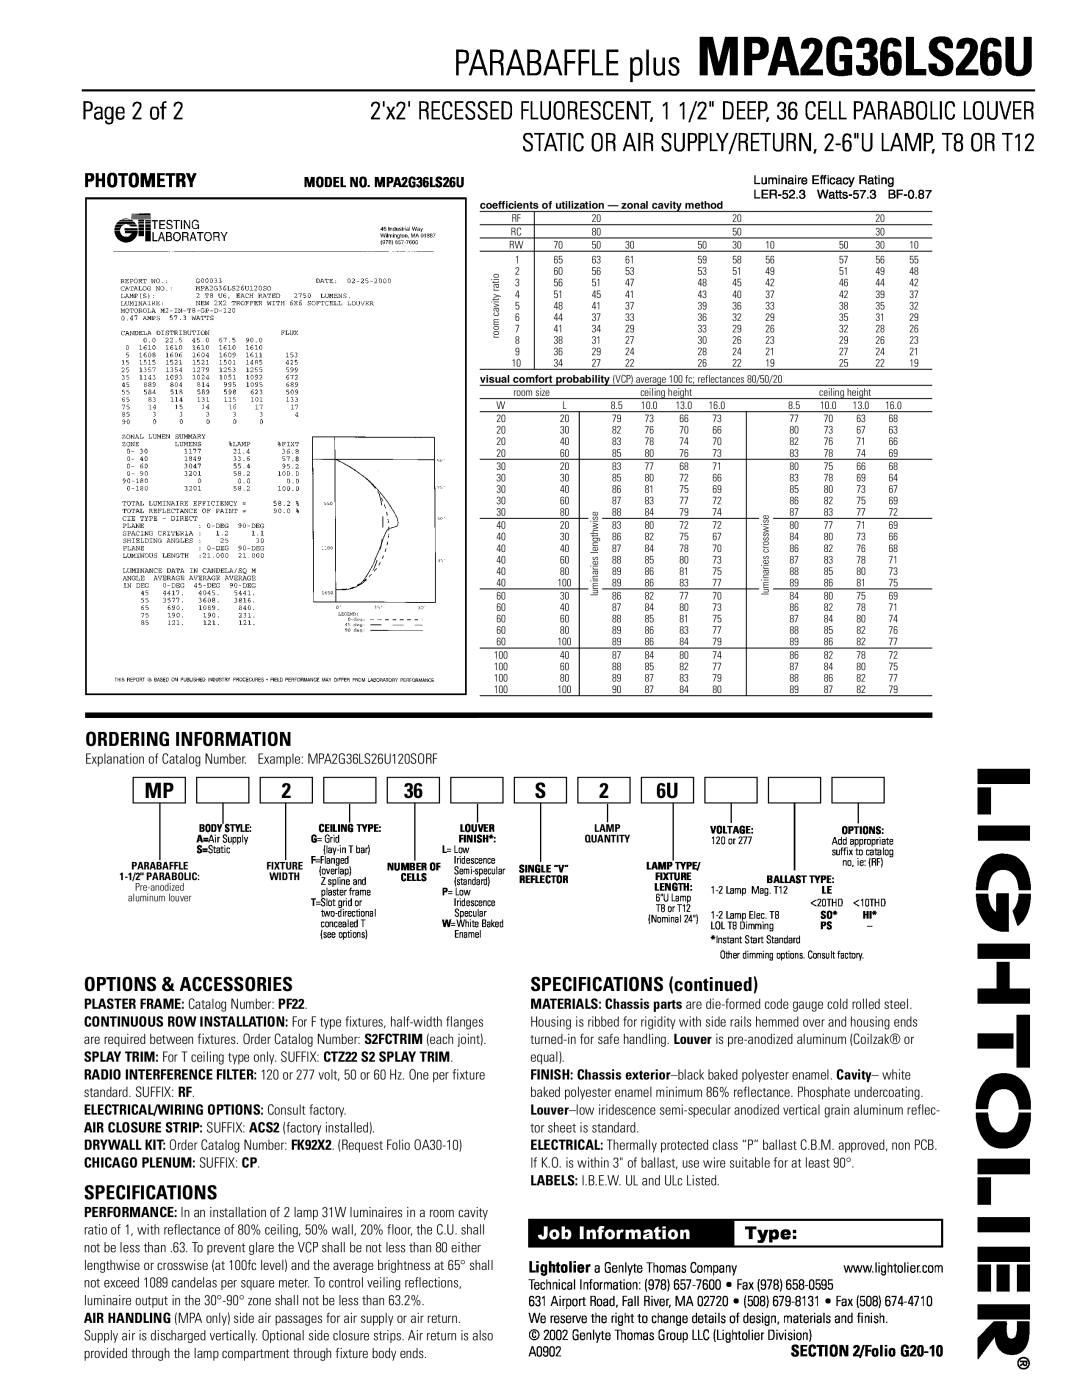 Lightolier MPA2G36LS26U dimensions Page 2 of, Photometry, Ordering Information, Options & Accessories, Specifications, Type 